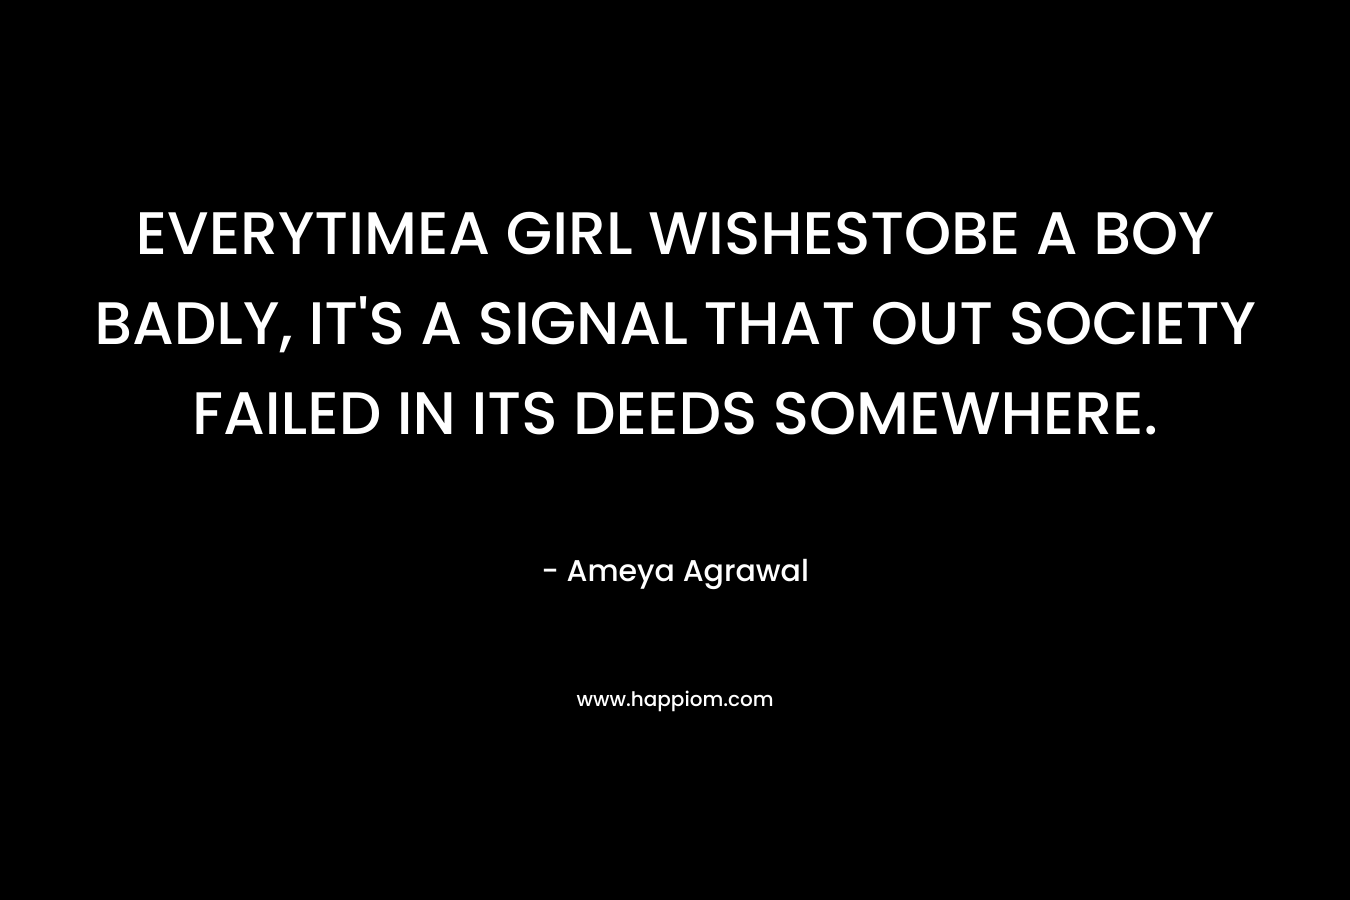 EVERYTIMEA GIRL WISHESTOBE A BOY BADLY, IT’S A SIGNAL THAT OUT SOCIETY FAILED IN ITS DEEDS SOMEWHERE. – Ameya Agrawal